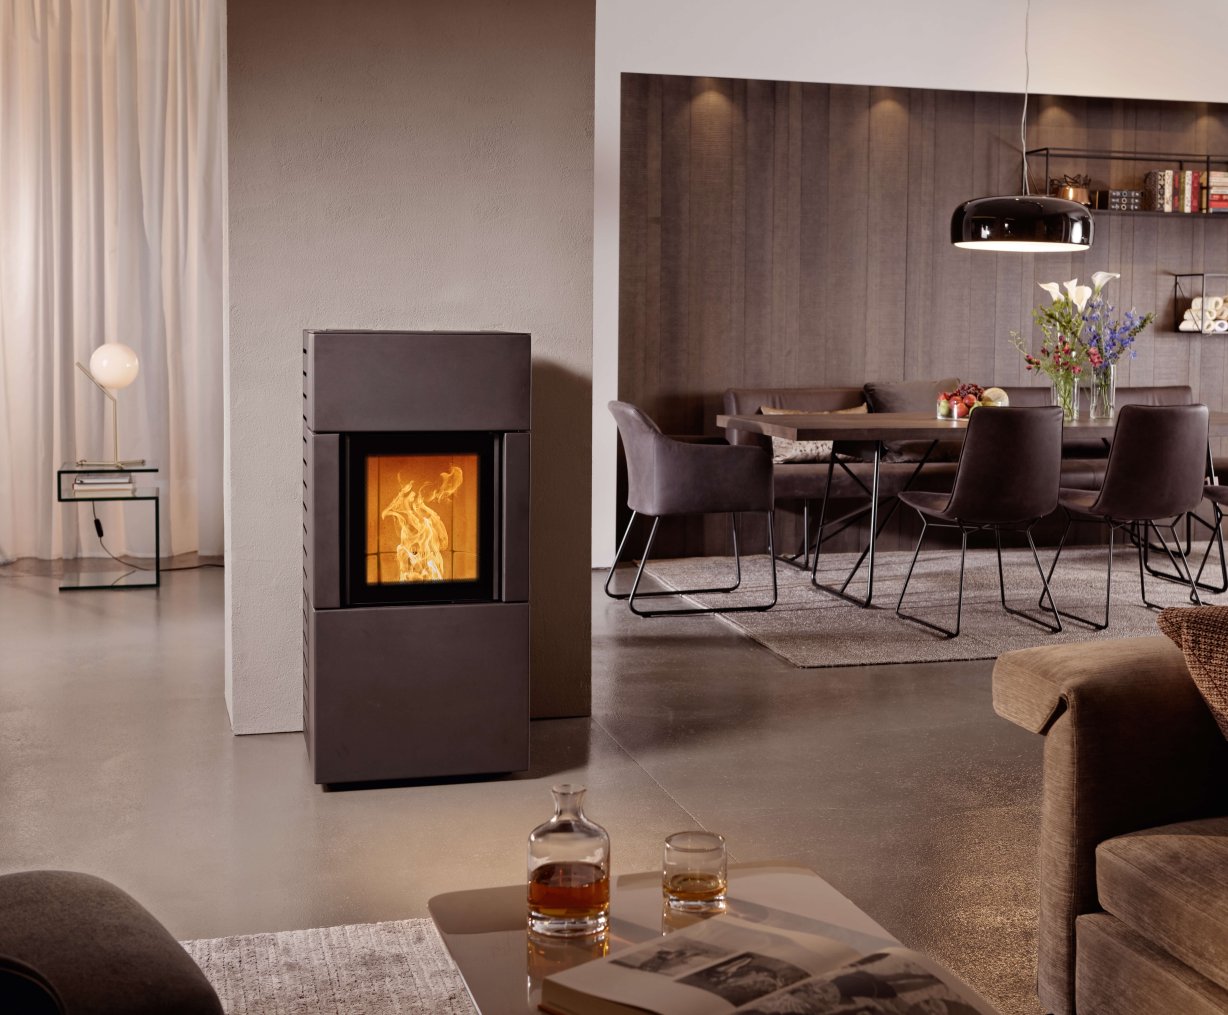 Percy pellet stove ambiance photo with steel cladding